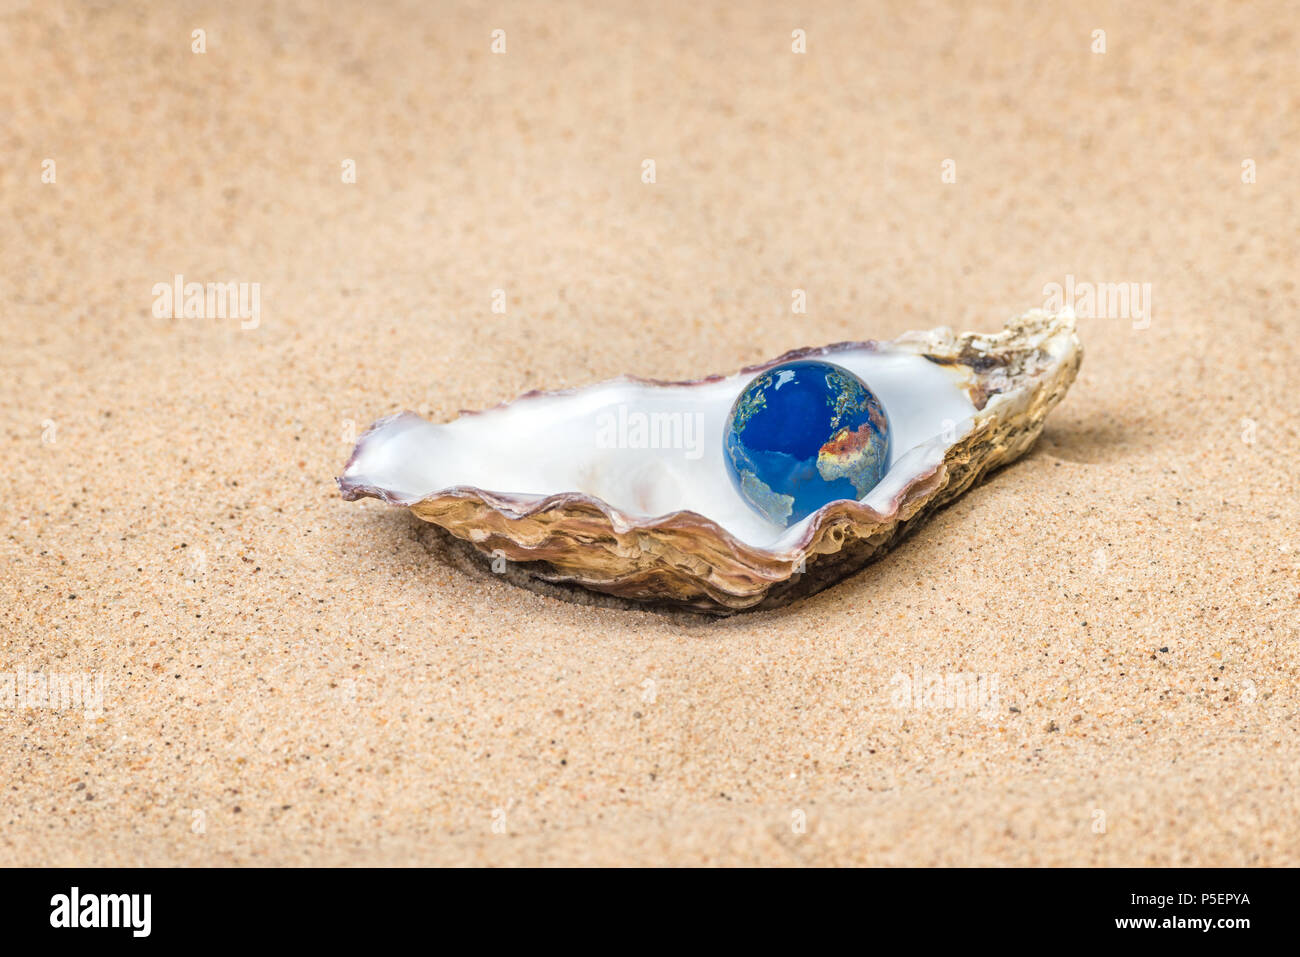 Concept image based on the metaphor - The World is your Oyster, a good image to represent future Opportunity, Fortune and Success type themes. Stock Photo